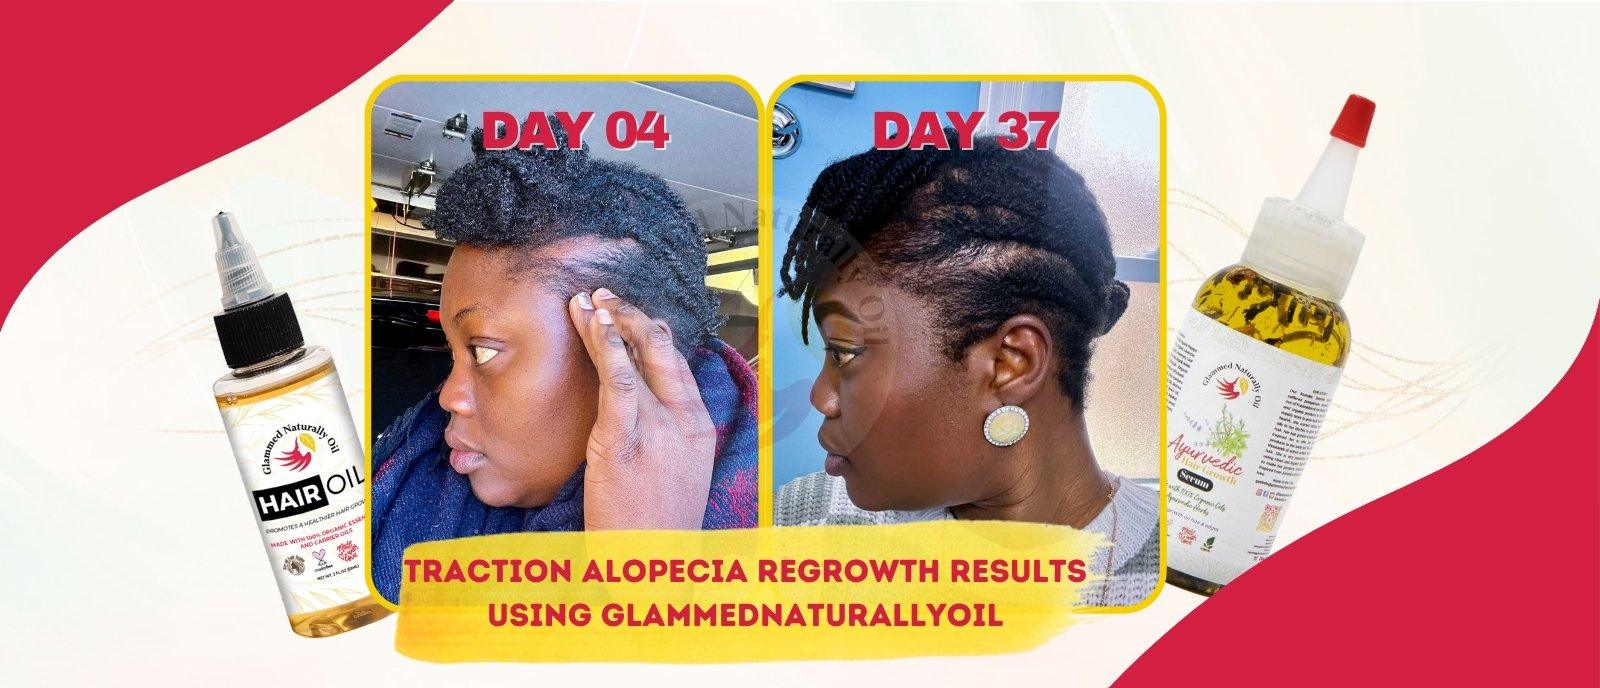 5 weeks Regrowth Traction Alopecia Journey - GlammedNaturallyOil